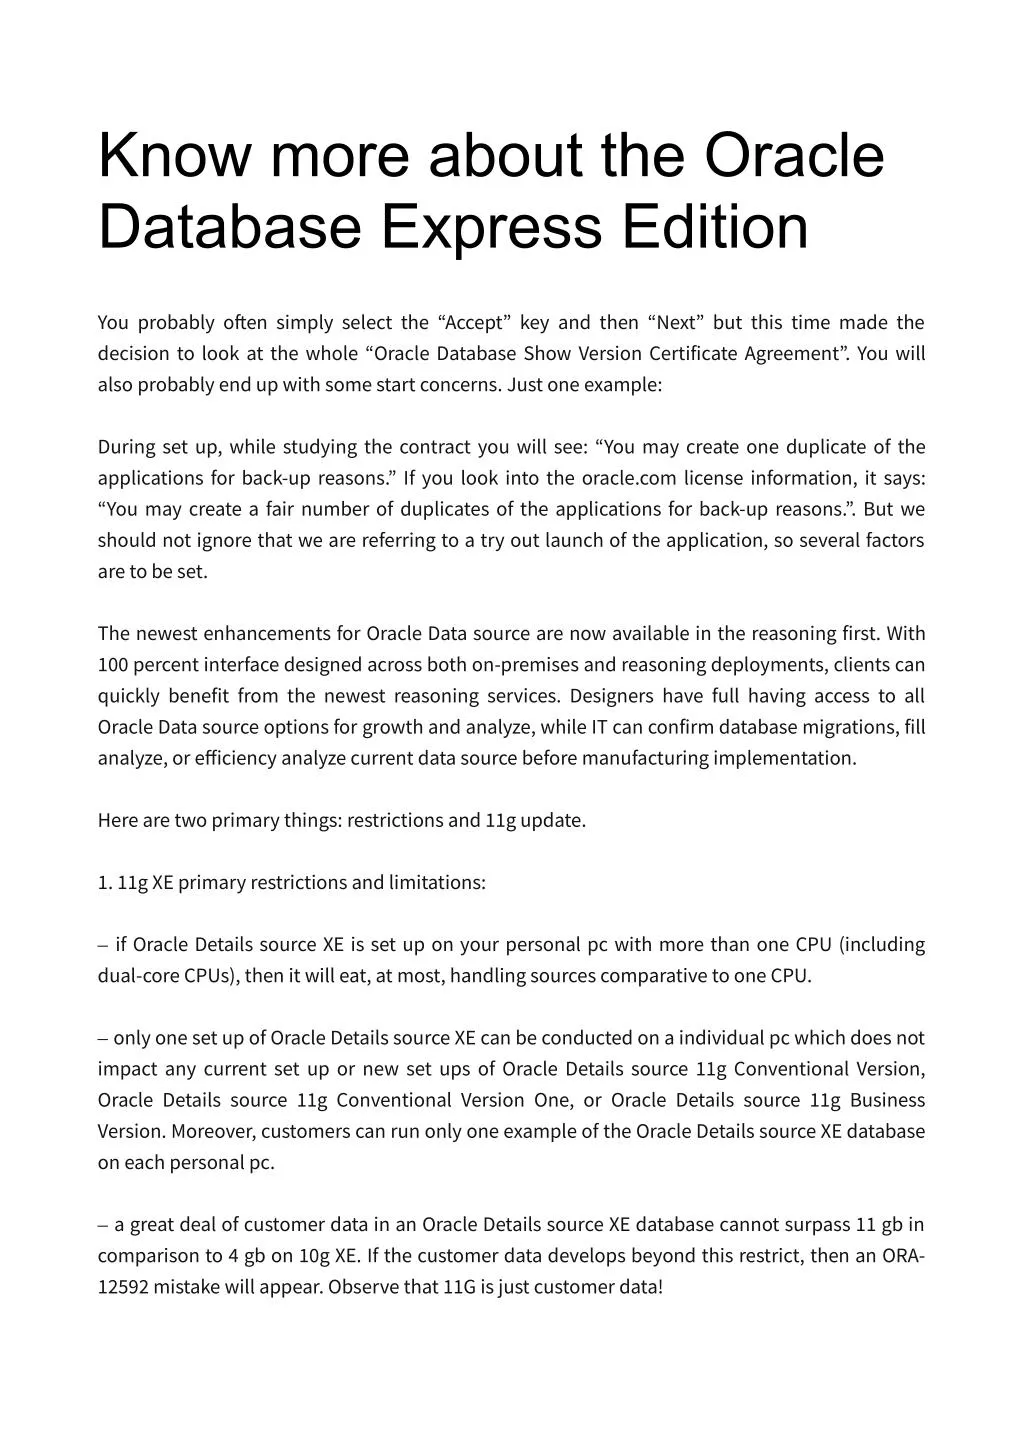 know more about the oracle database express